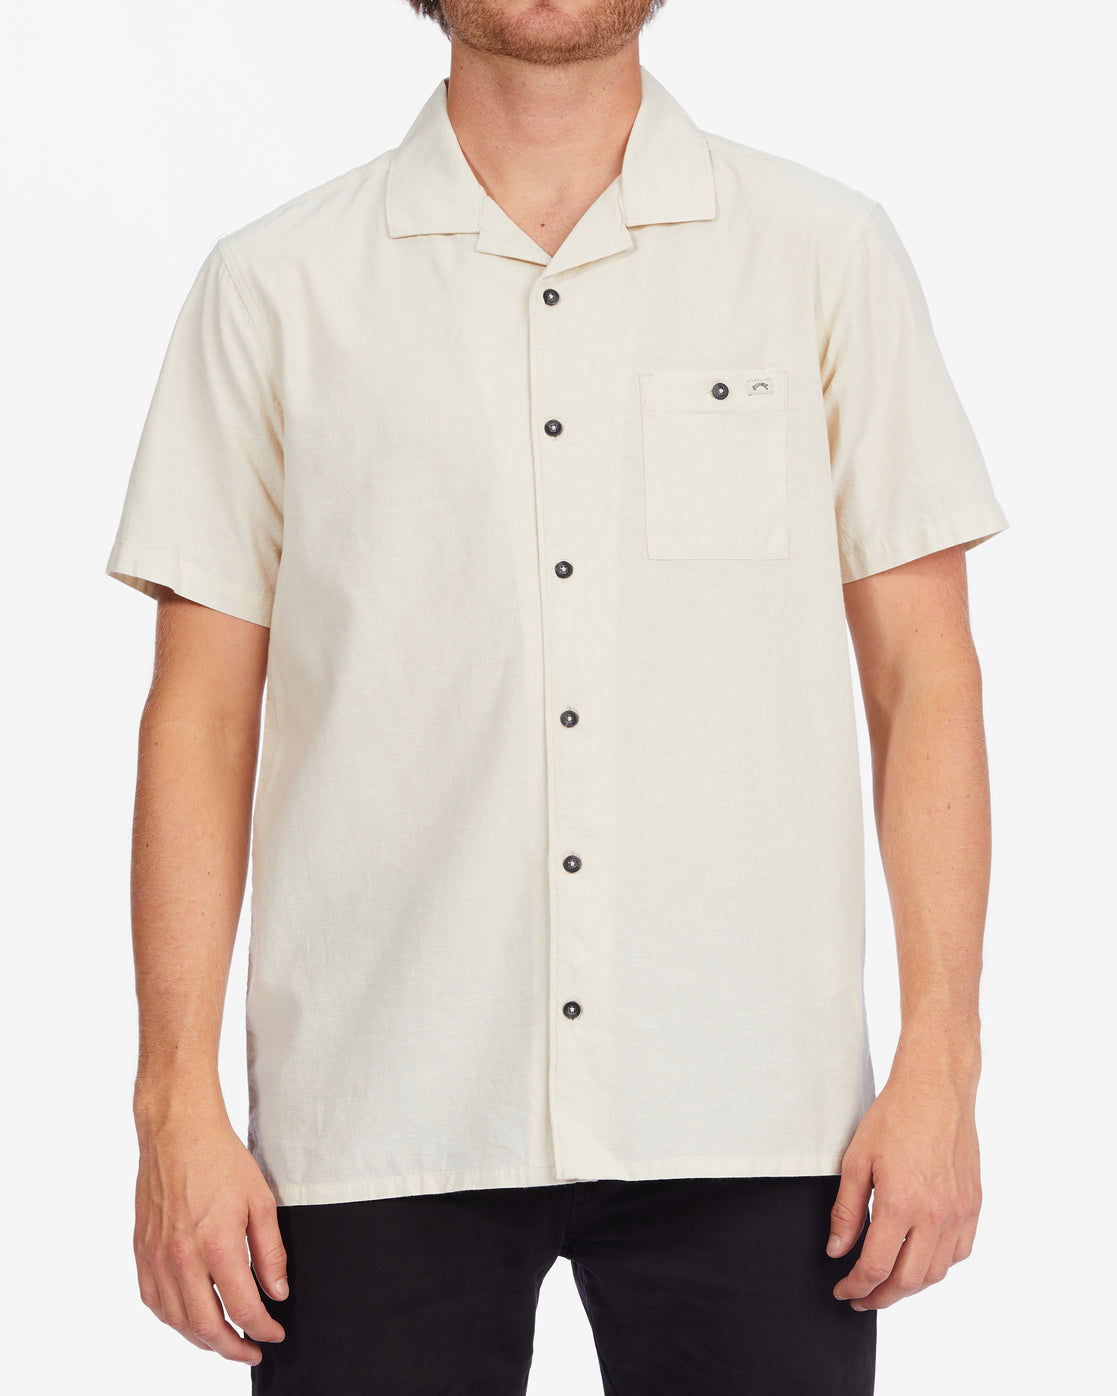 Vacay All Day Short Sleeve Shirt - ABYWT00160